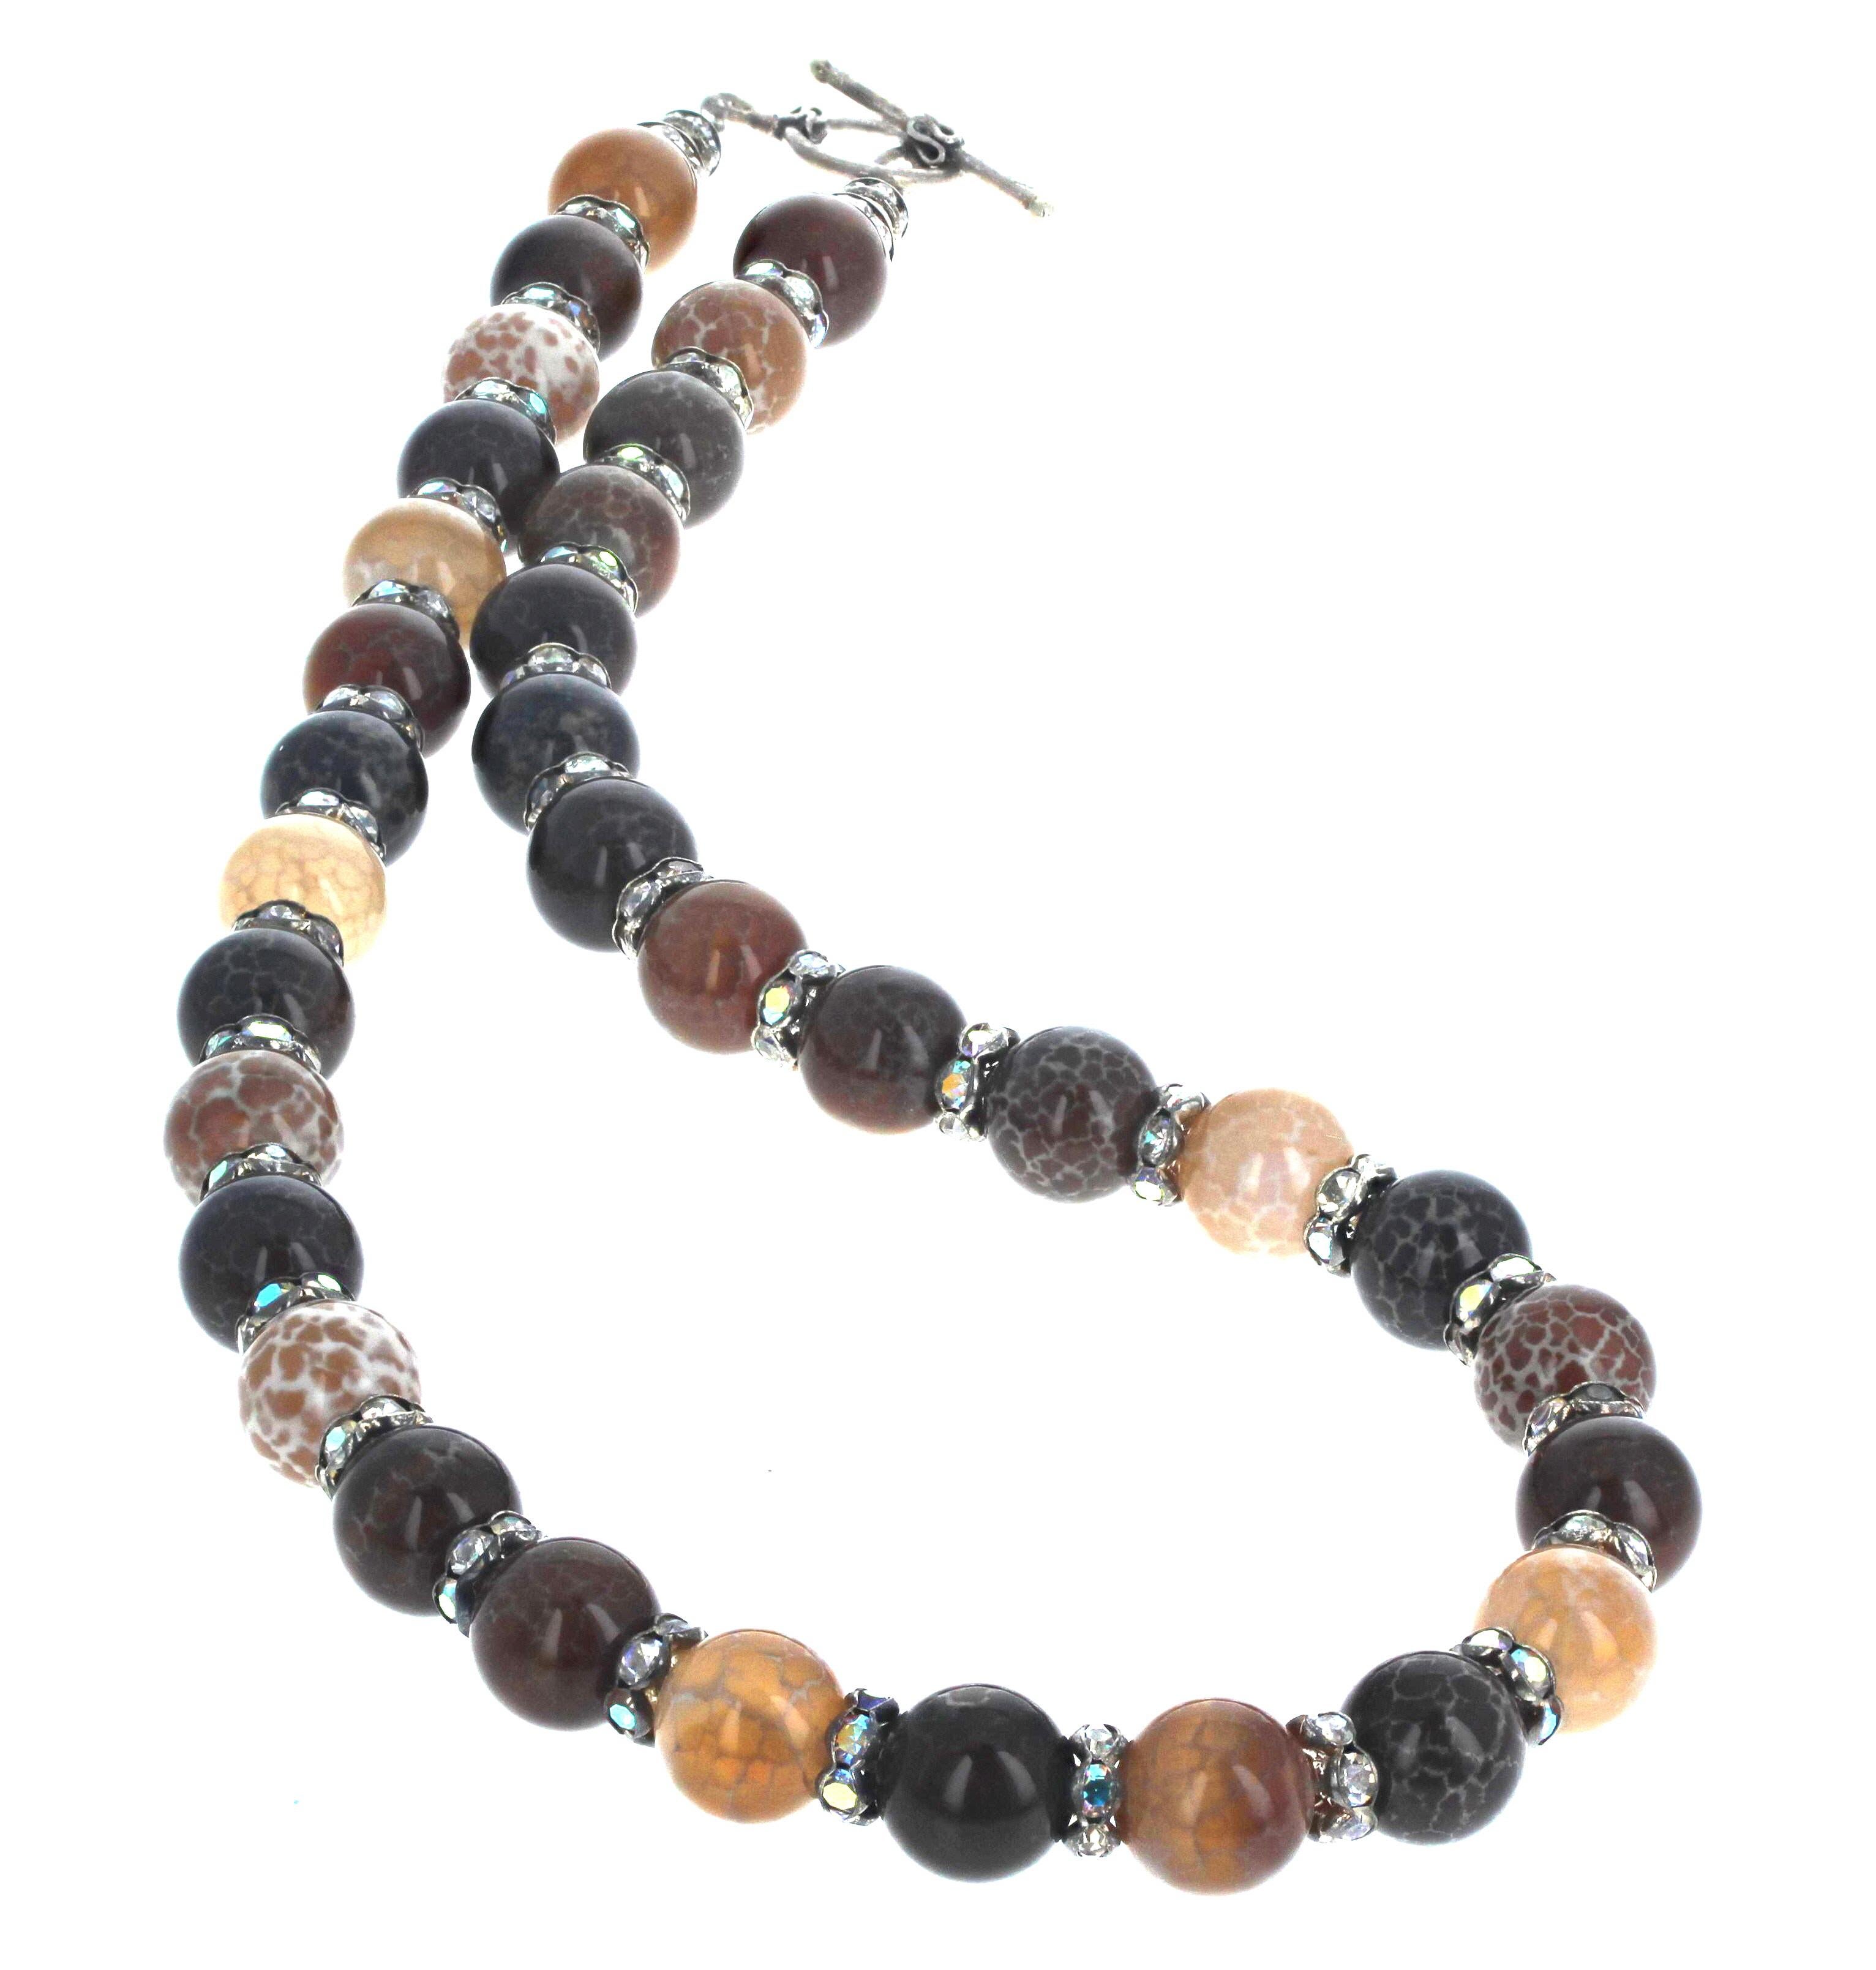 Women's or Men's AJD Dramatic Fascinating Sparkly Lovely Natural Agate 20